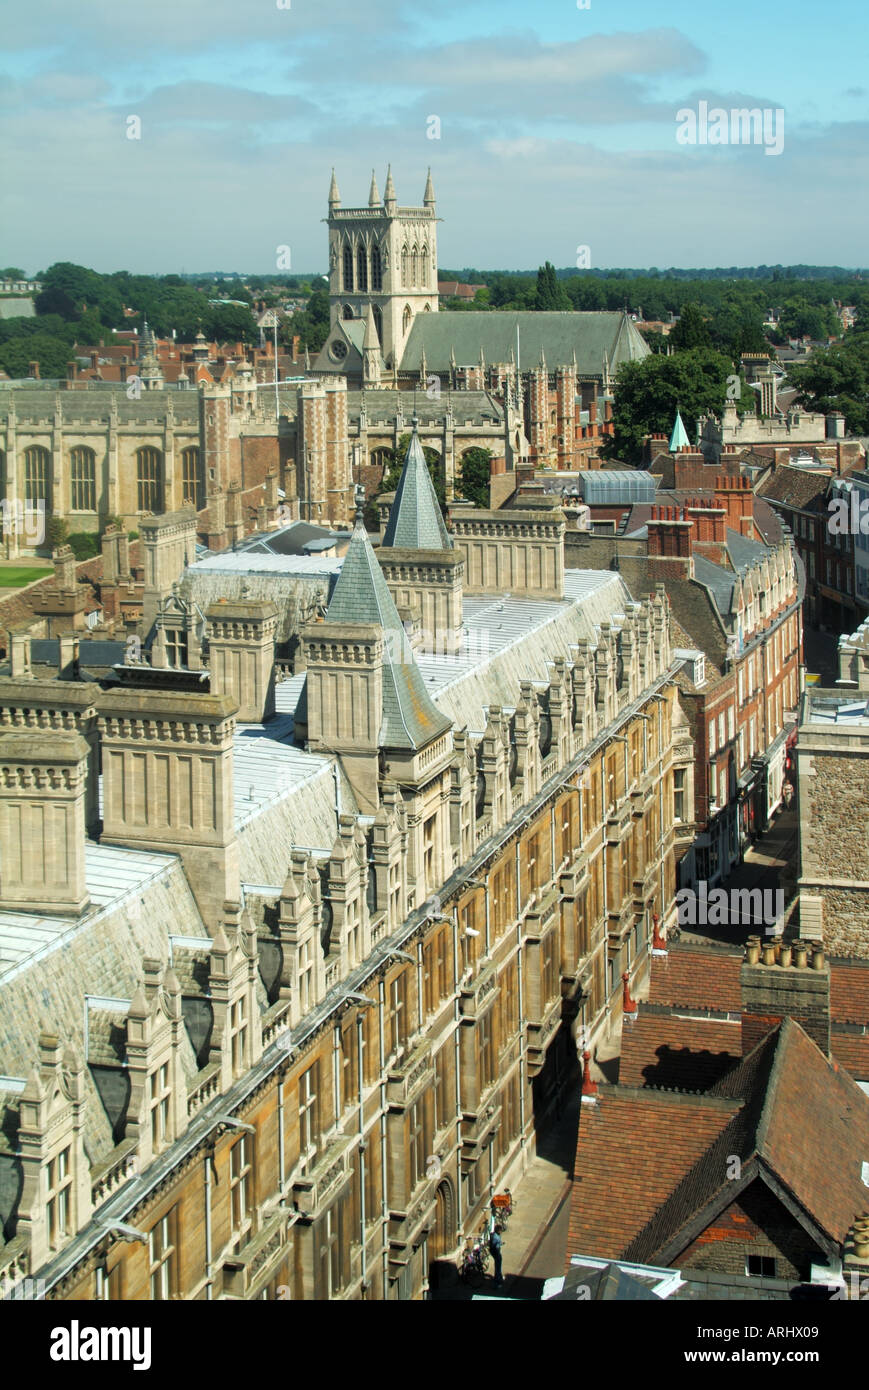 City of Cambridge a university town sunny blue sky day aerial view of historical college rooftops spires and church towers Cambridgeshire England UK Stock Photo